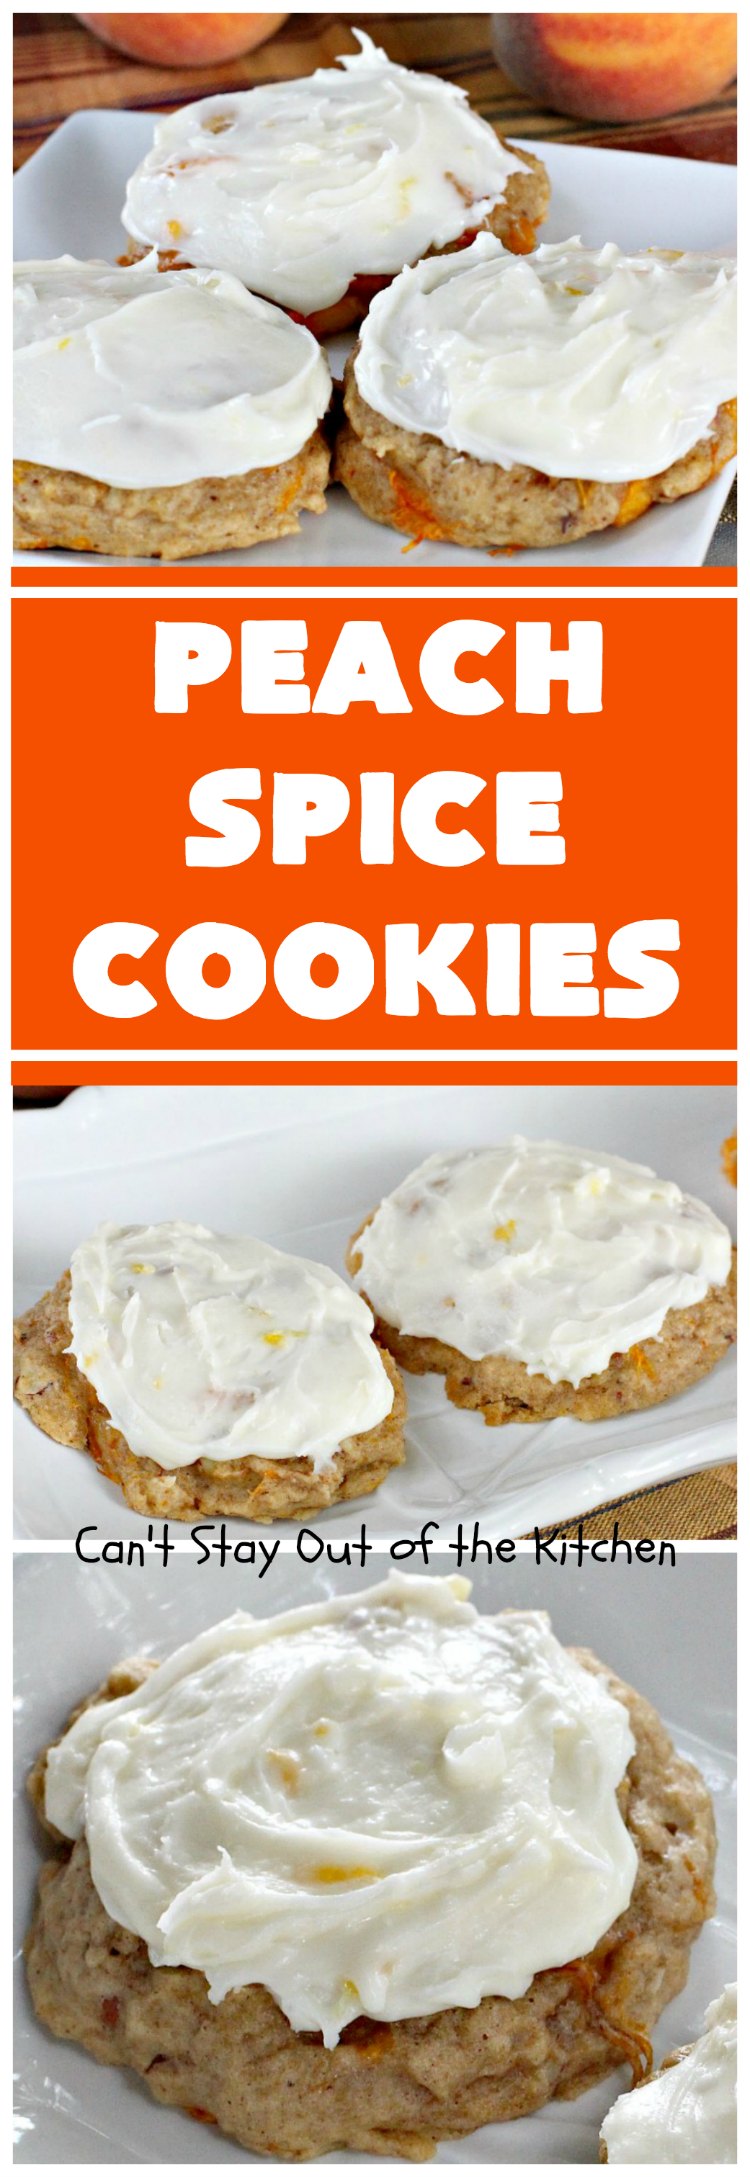 Peach Spice Cookies | Can't Stay Out of the Kitchen